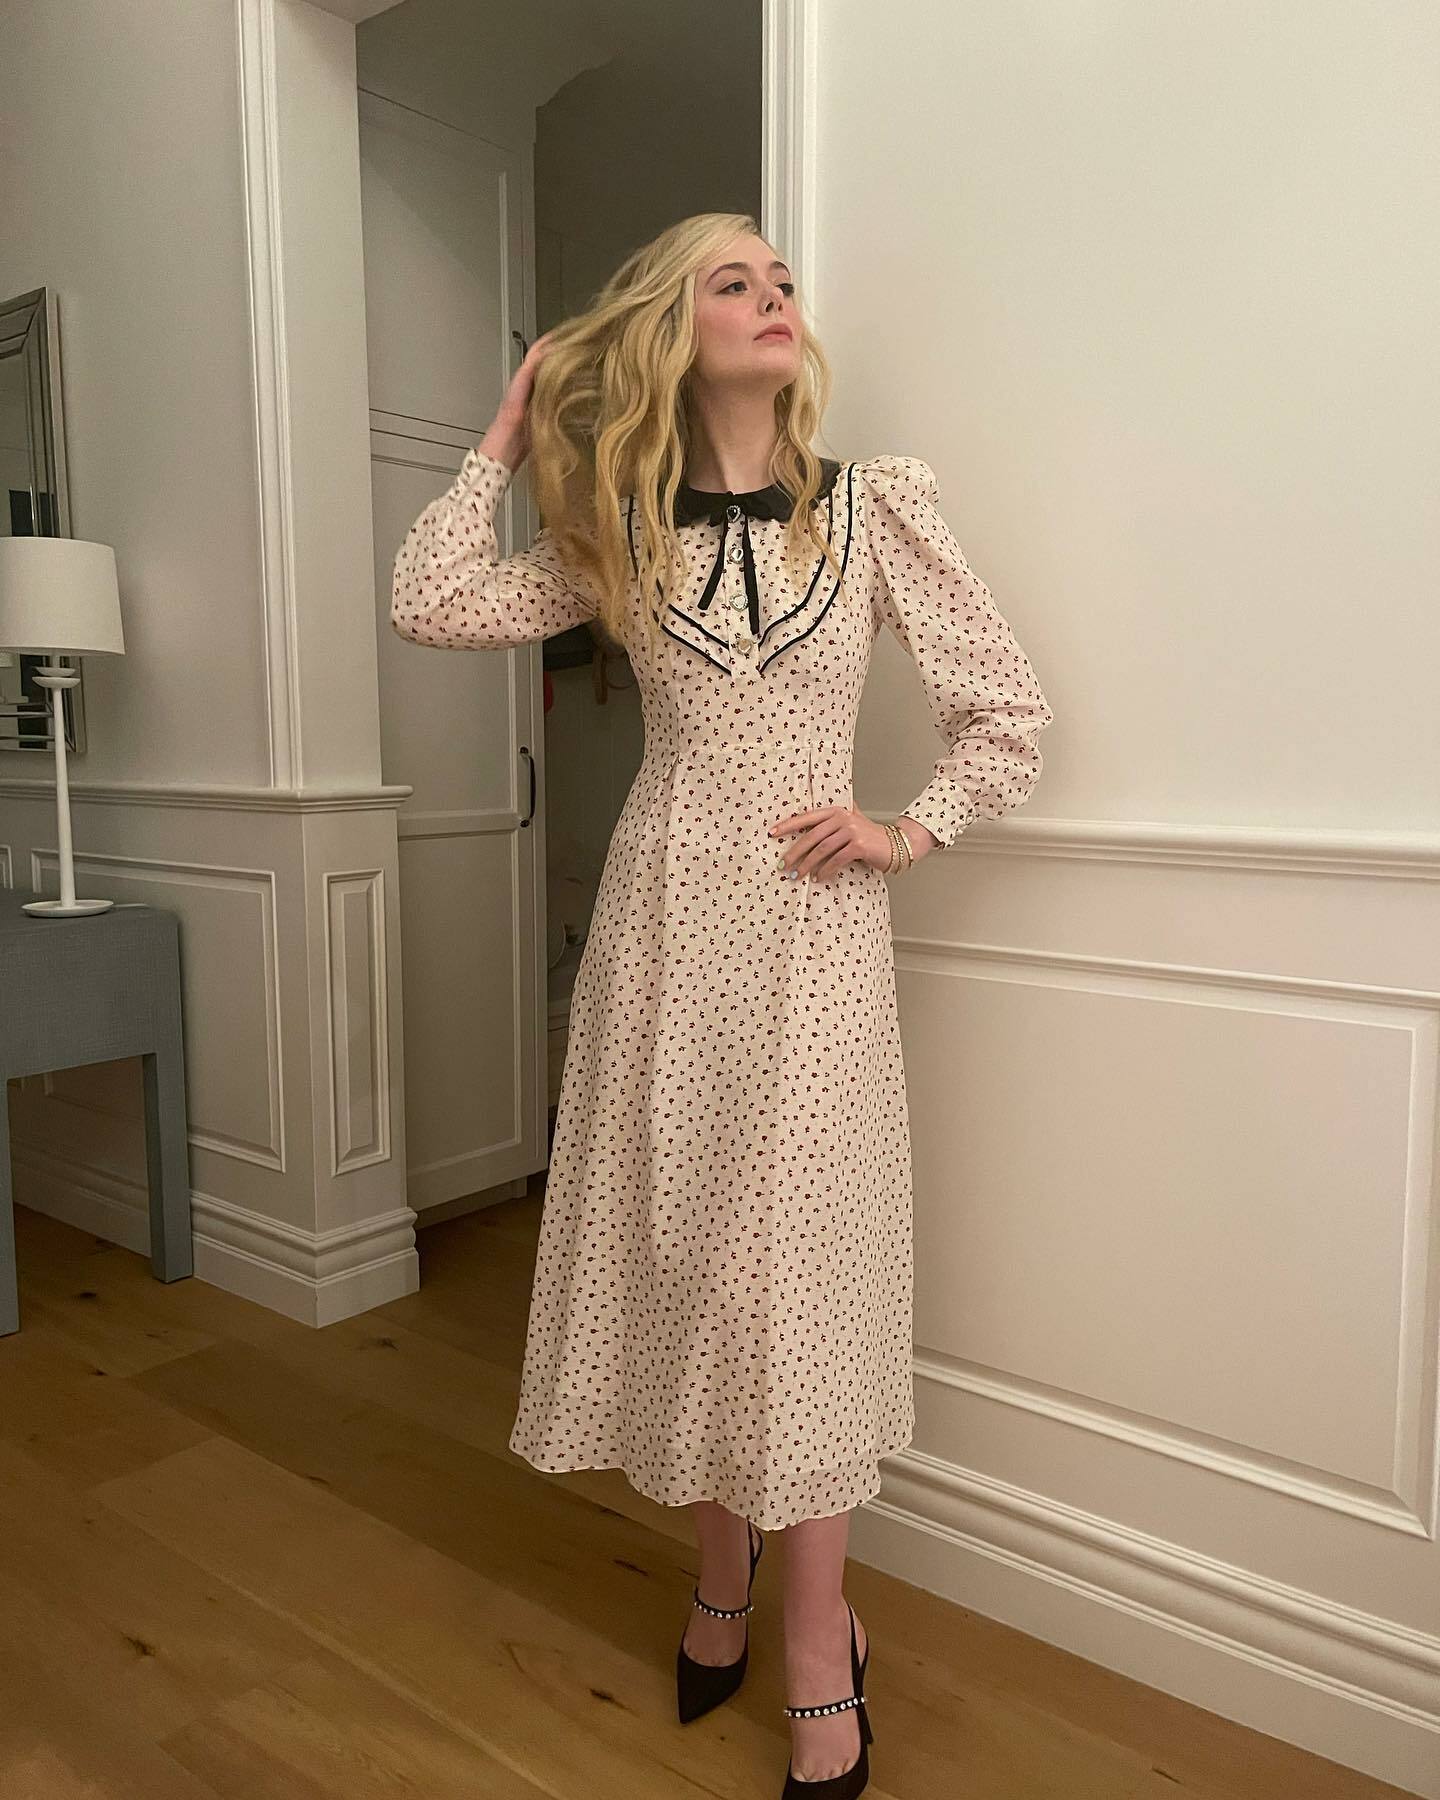 Elle Fanning on Set with Cartier! - Photo 28